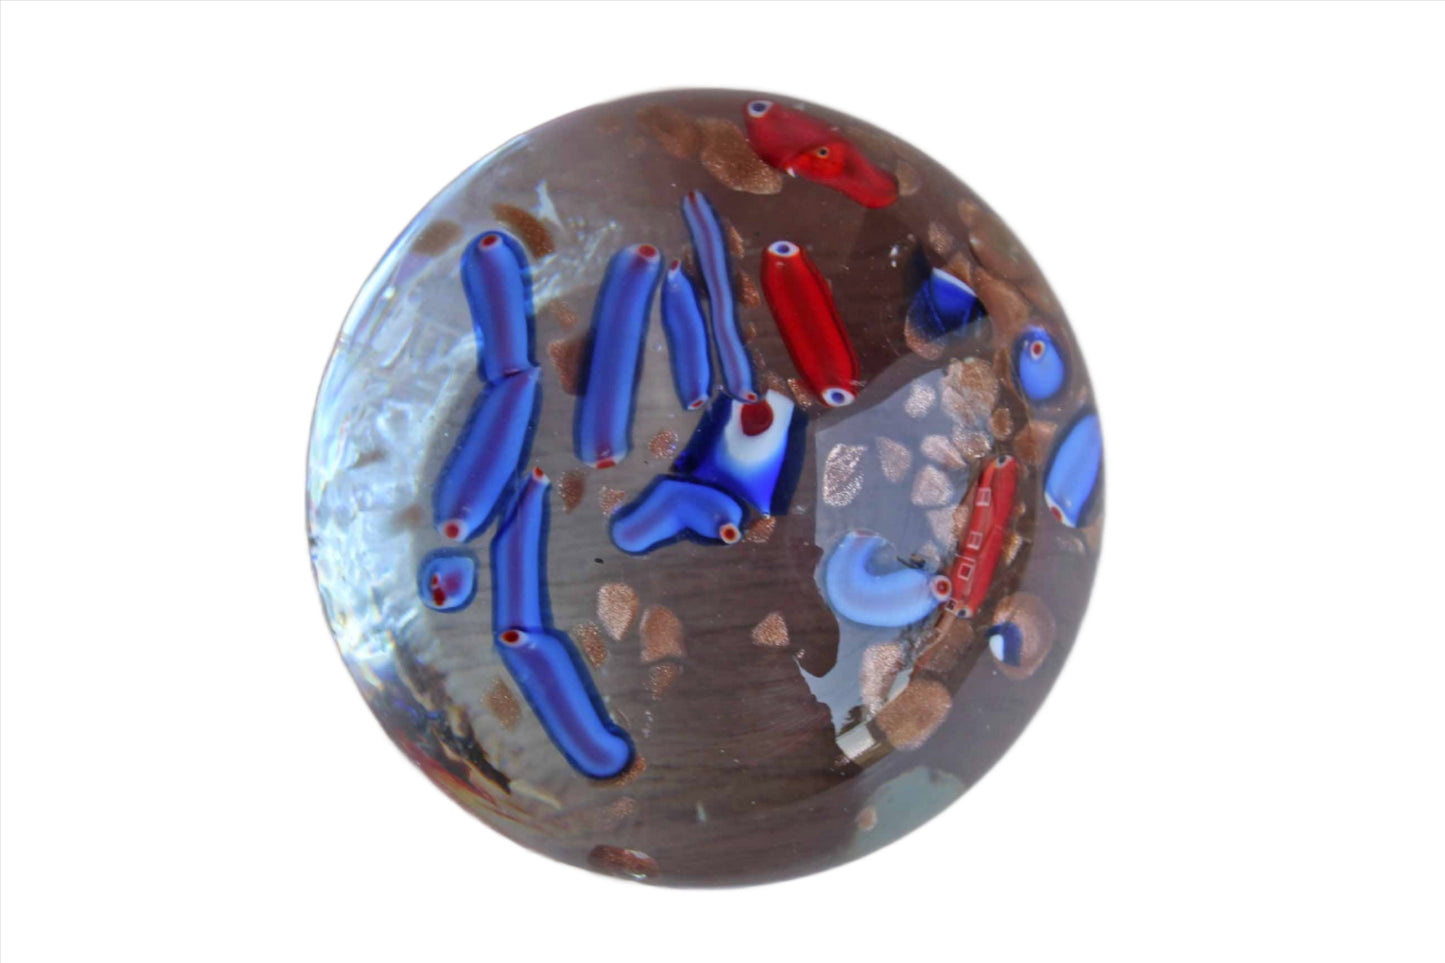 Murano (Italy) Heavy Glass Paperweight with Colorful Blown-Glass Pieces